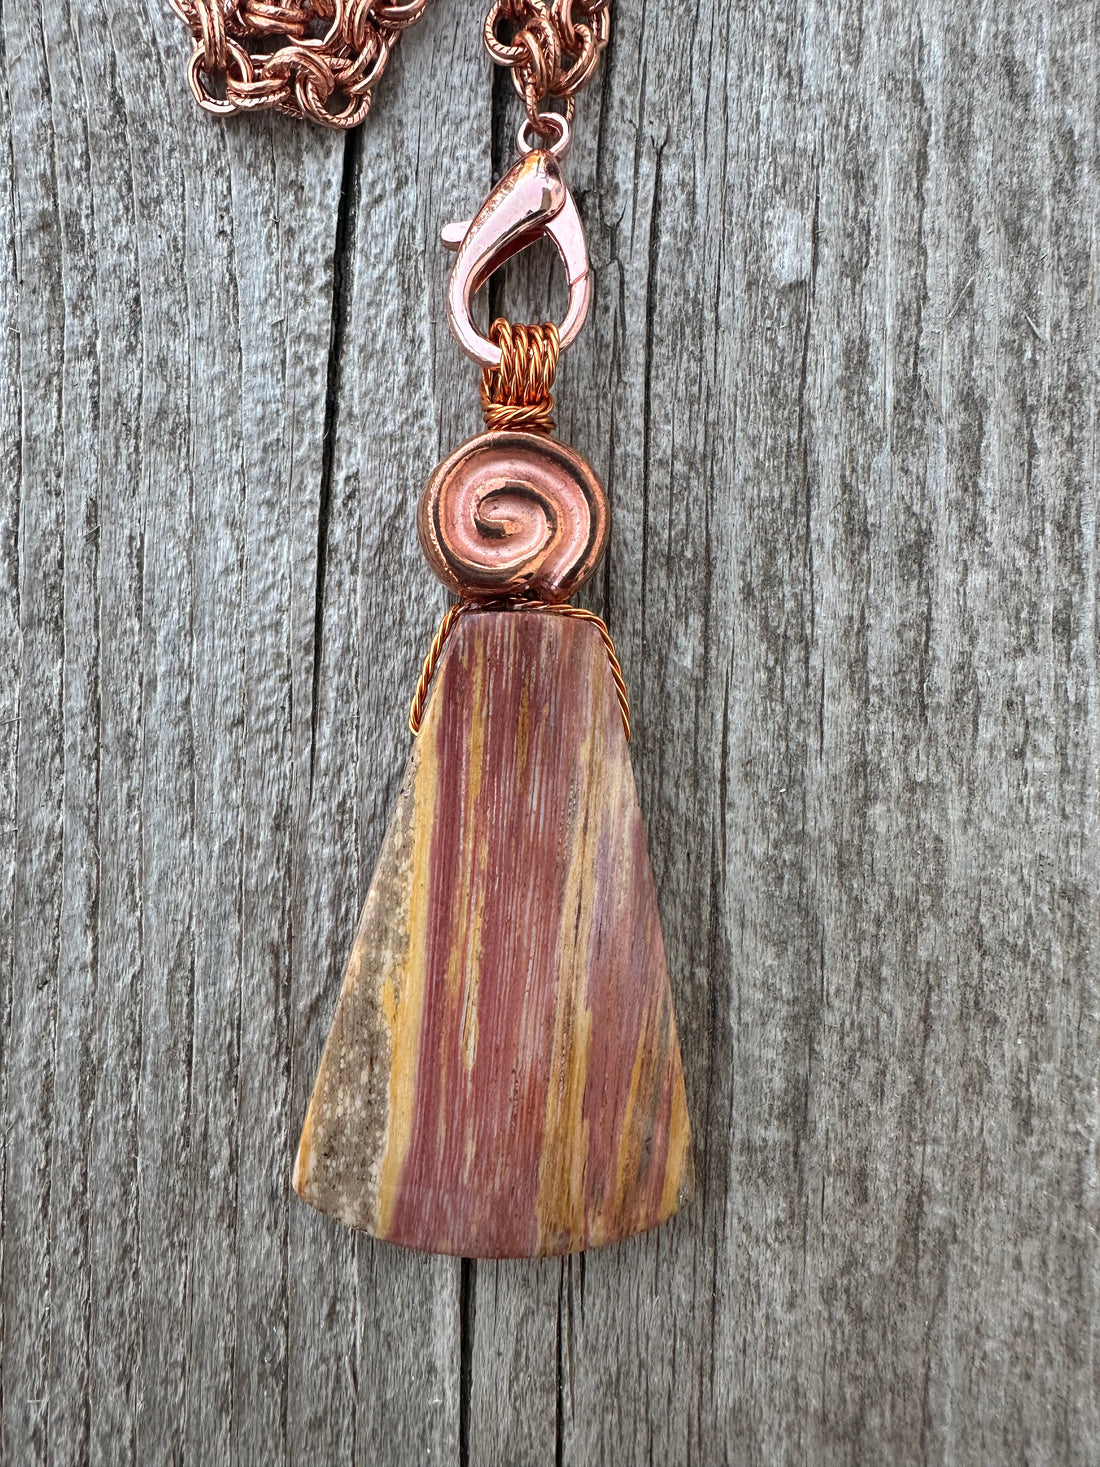 Petrified Wood Necklace for Transformation and Releasing Negativity. Swirl Signifies Consciousness.